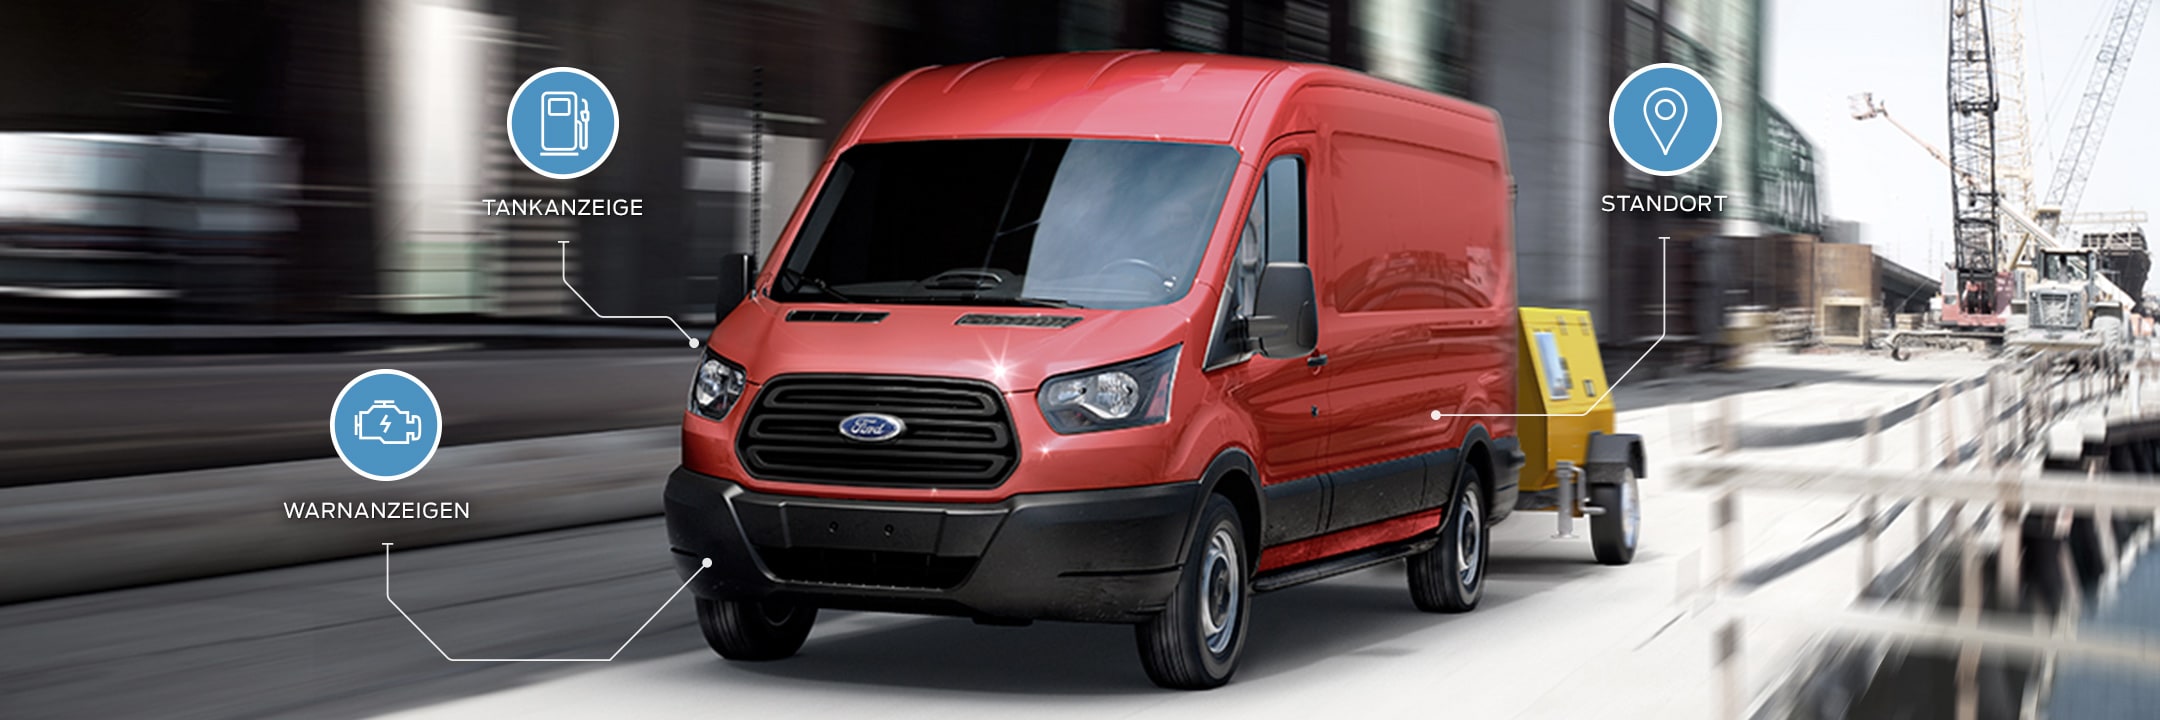 Ford Pro™ Software Data Service Red Transit Van